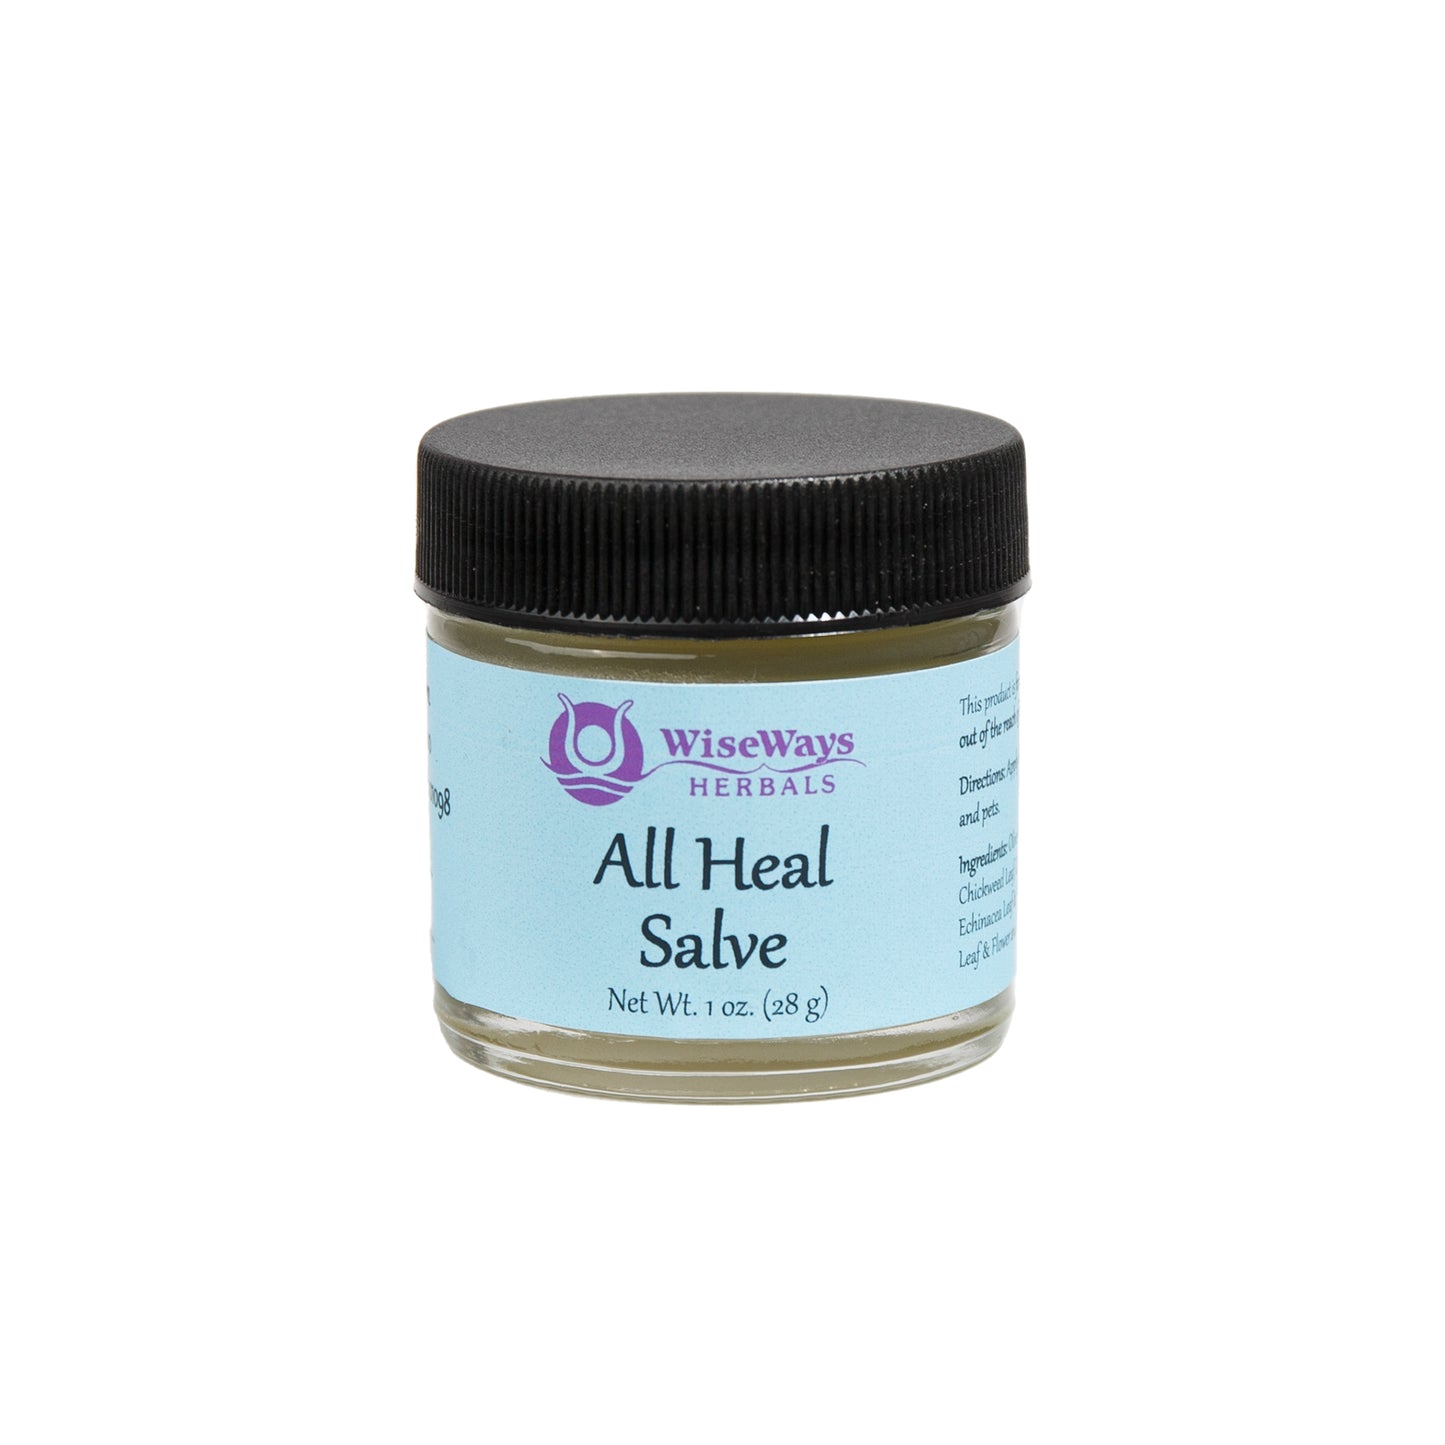 Primary image of All Heal Salve